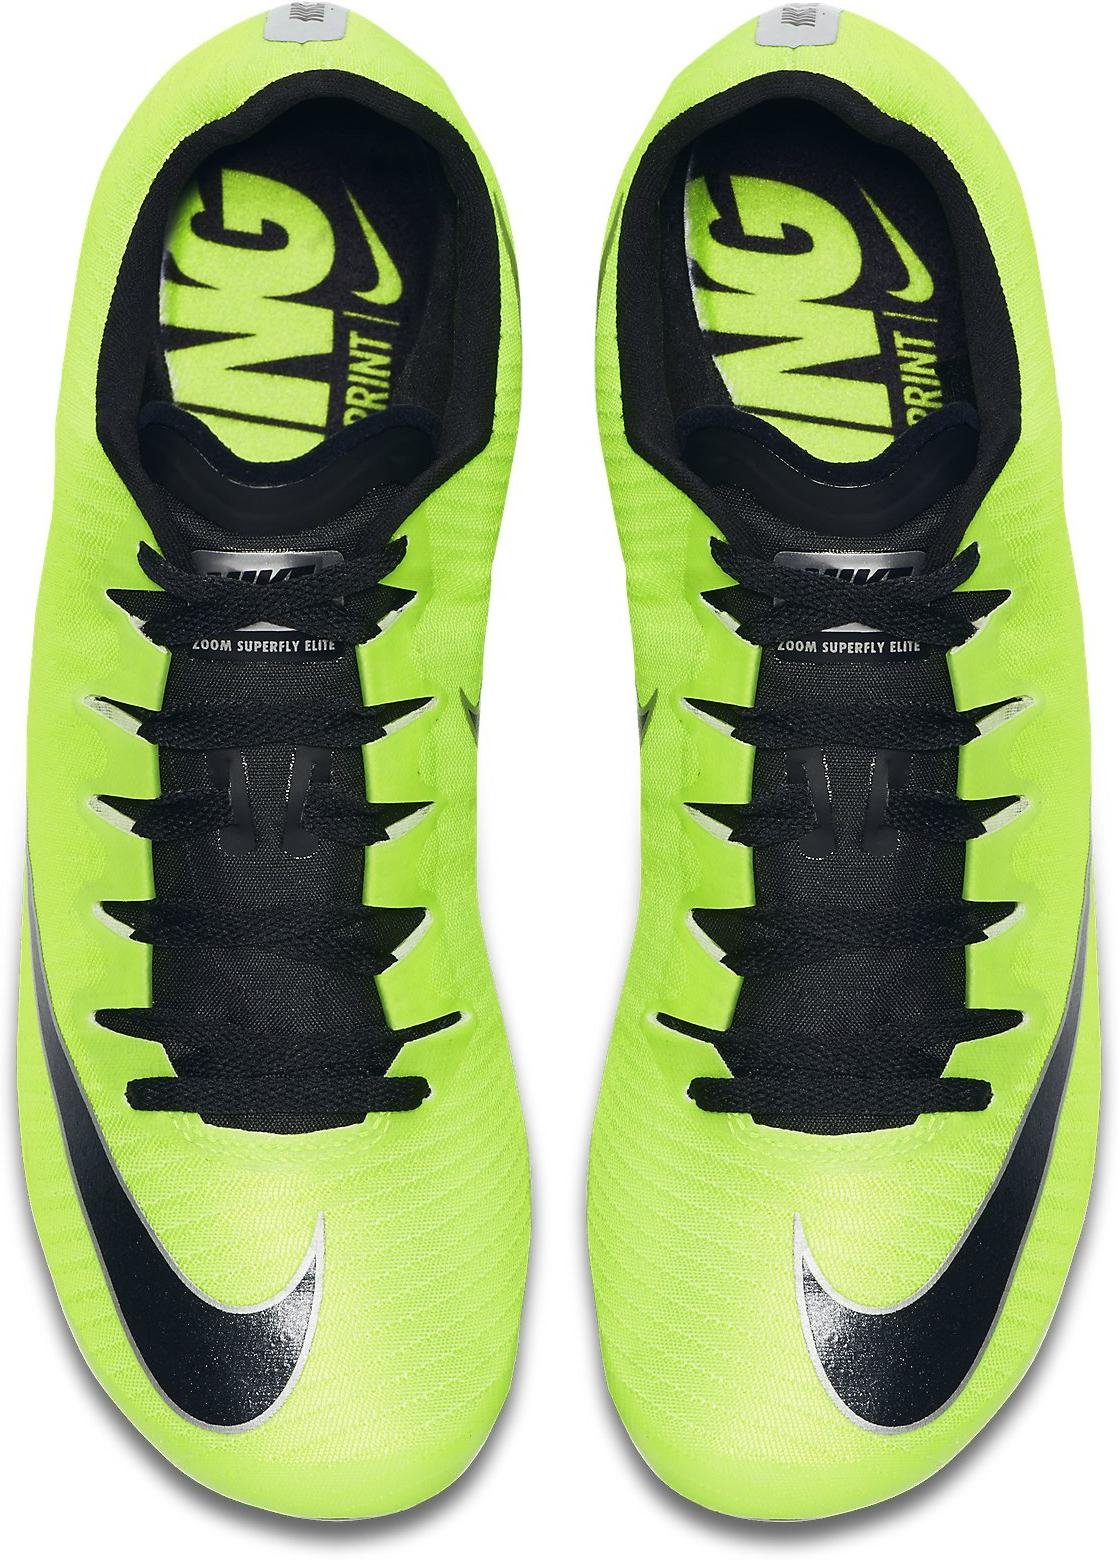 Or either Out of breath appease Track shoes/Spikes Nike ZOOM SUPERFLY ELITE - Top4Fitness.com